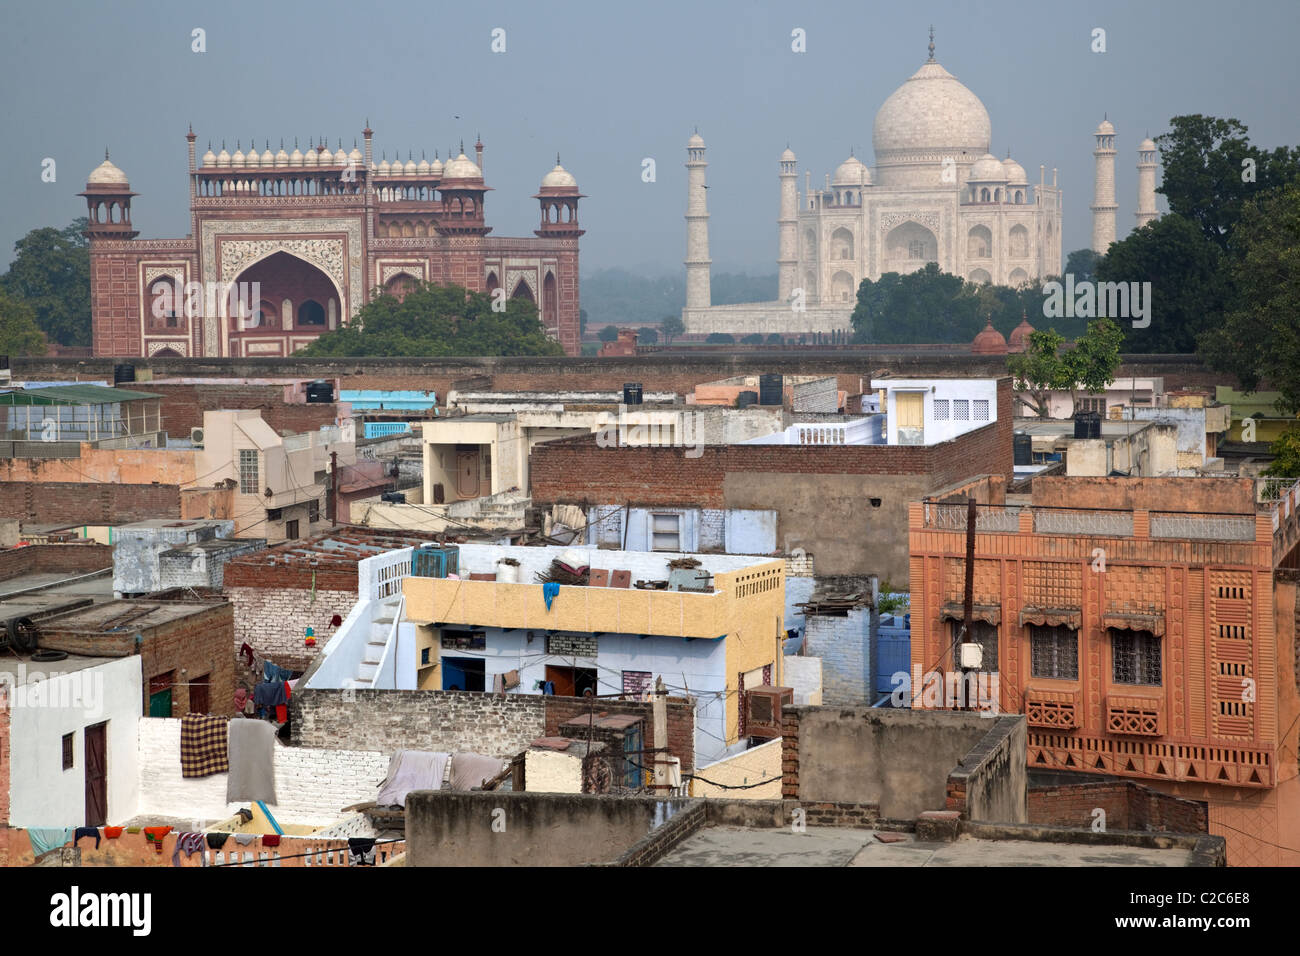 A cityscape shot from a rooftop restaurant with Taj Mahal seen in the distance in Agra, India. Stock Photo